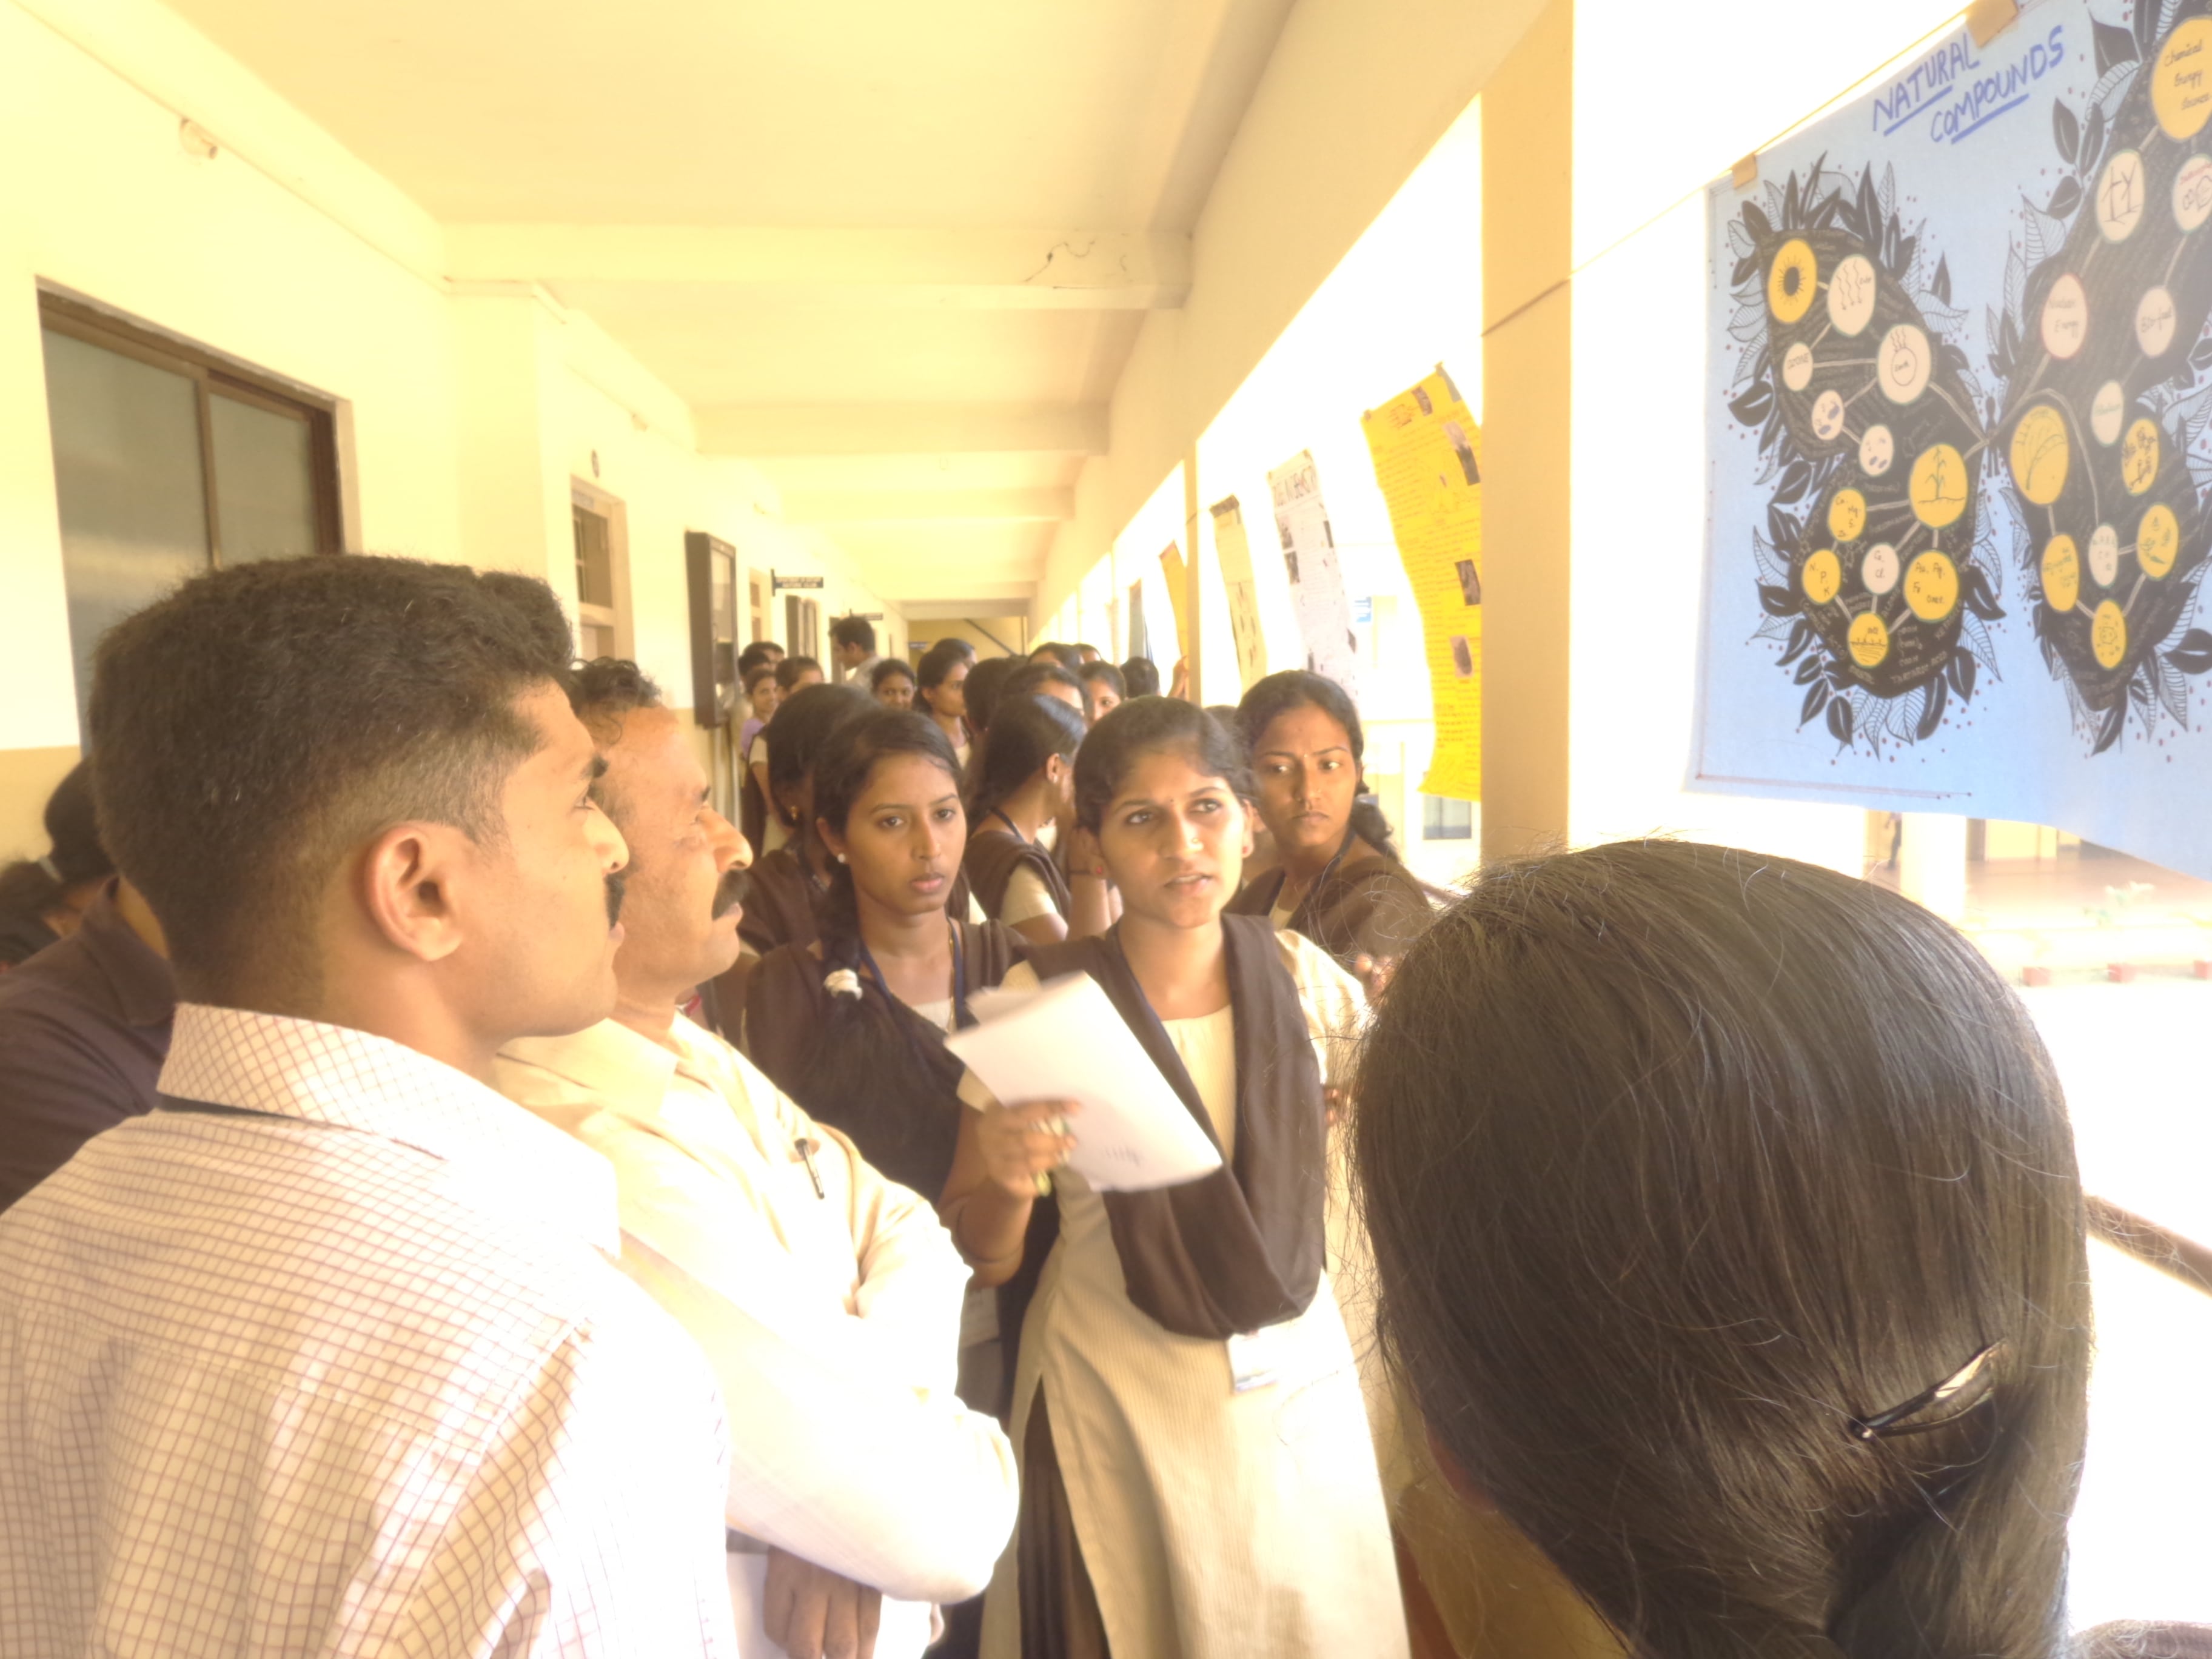 A poster presentation competition held on 02/02/2015